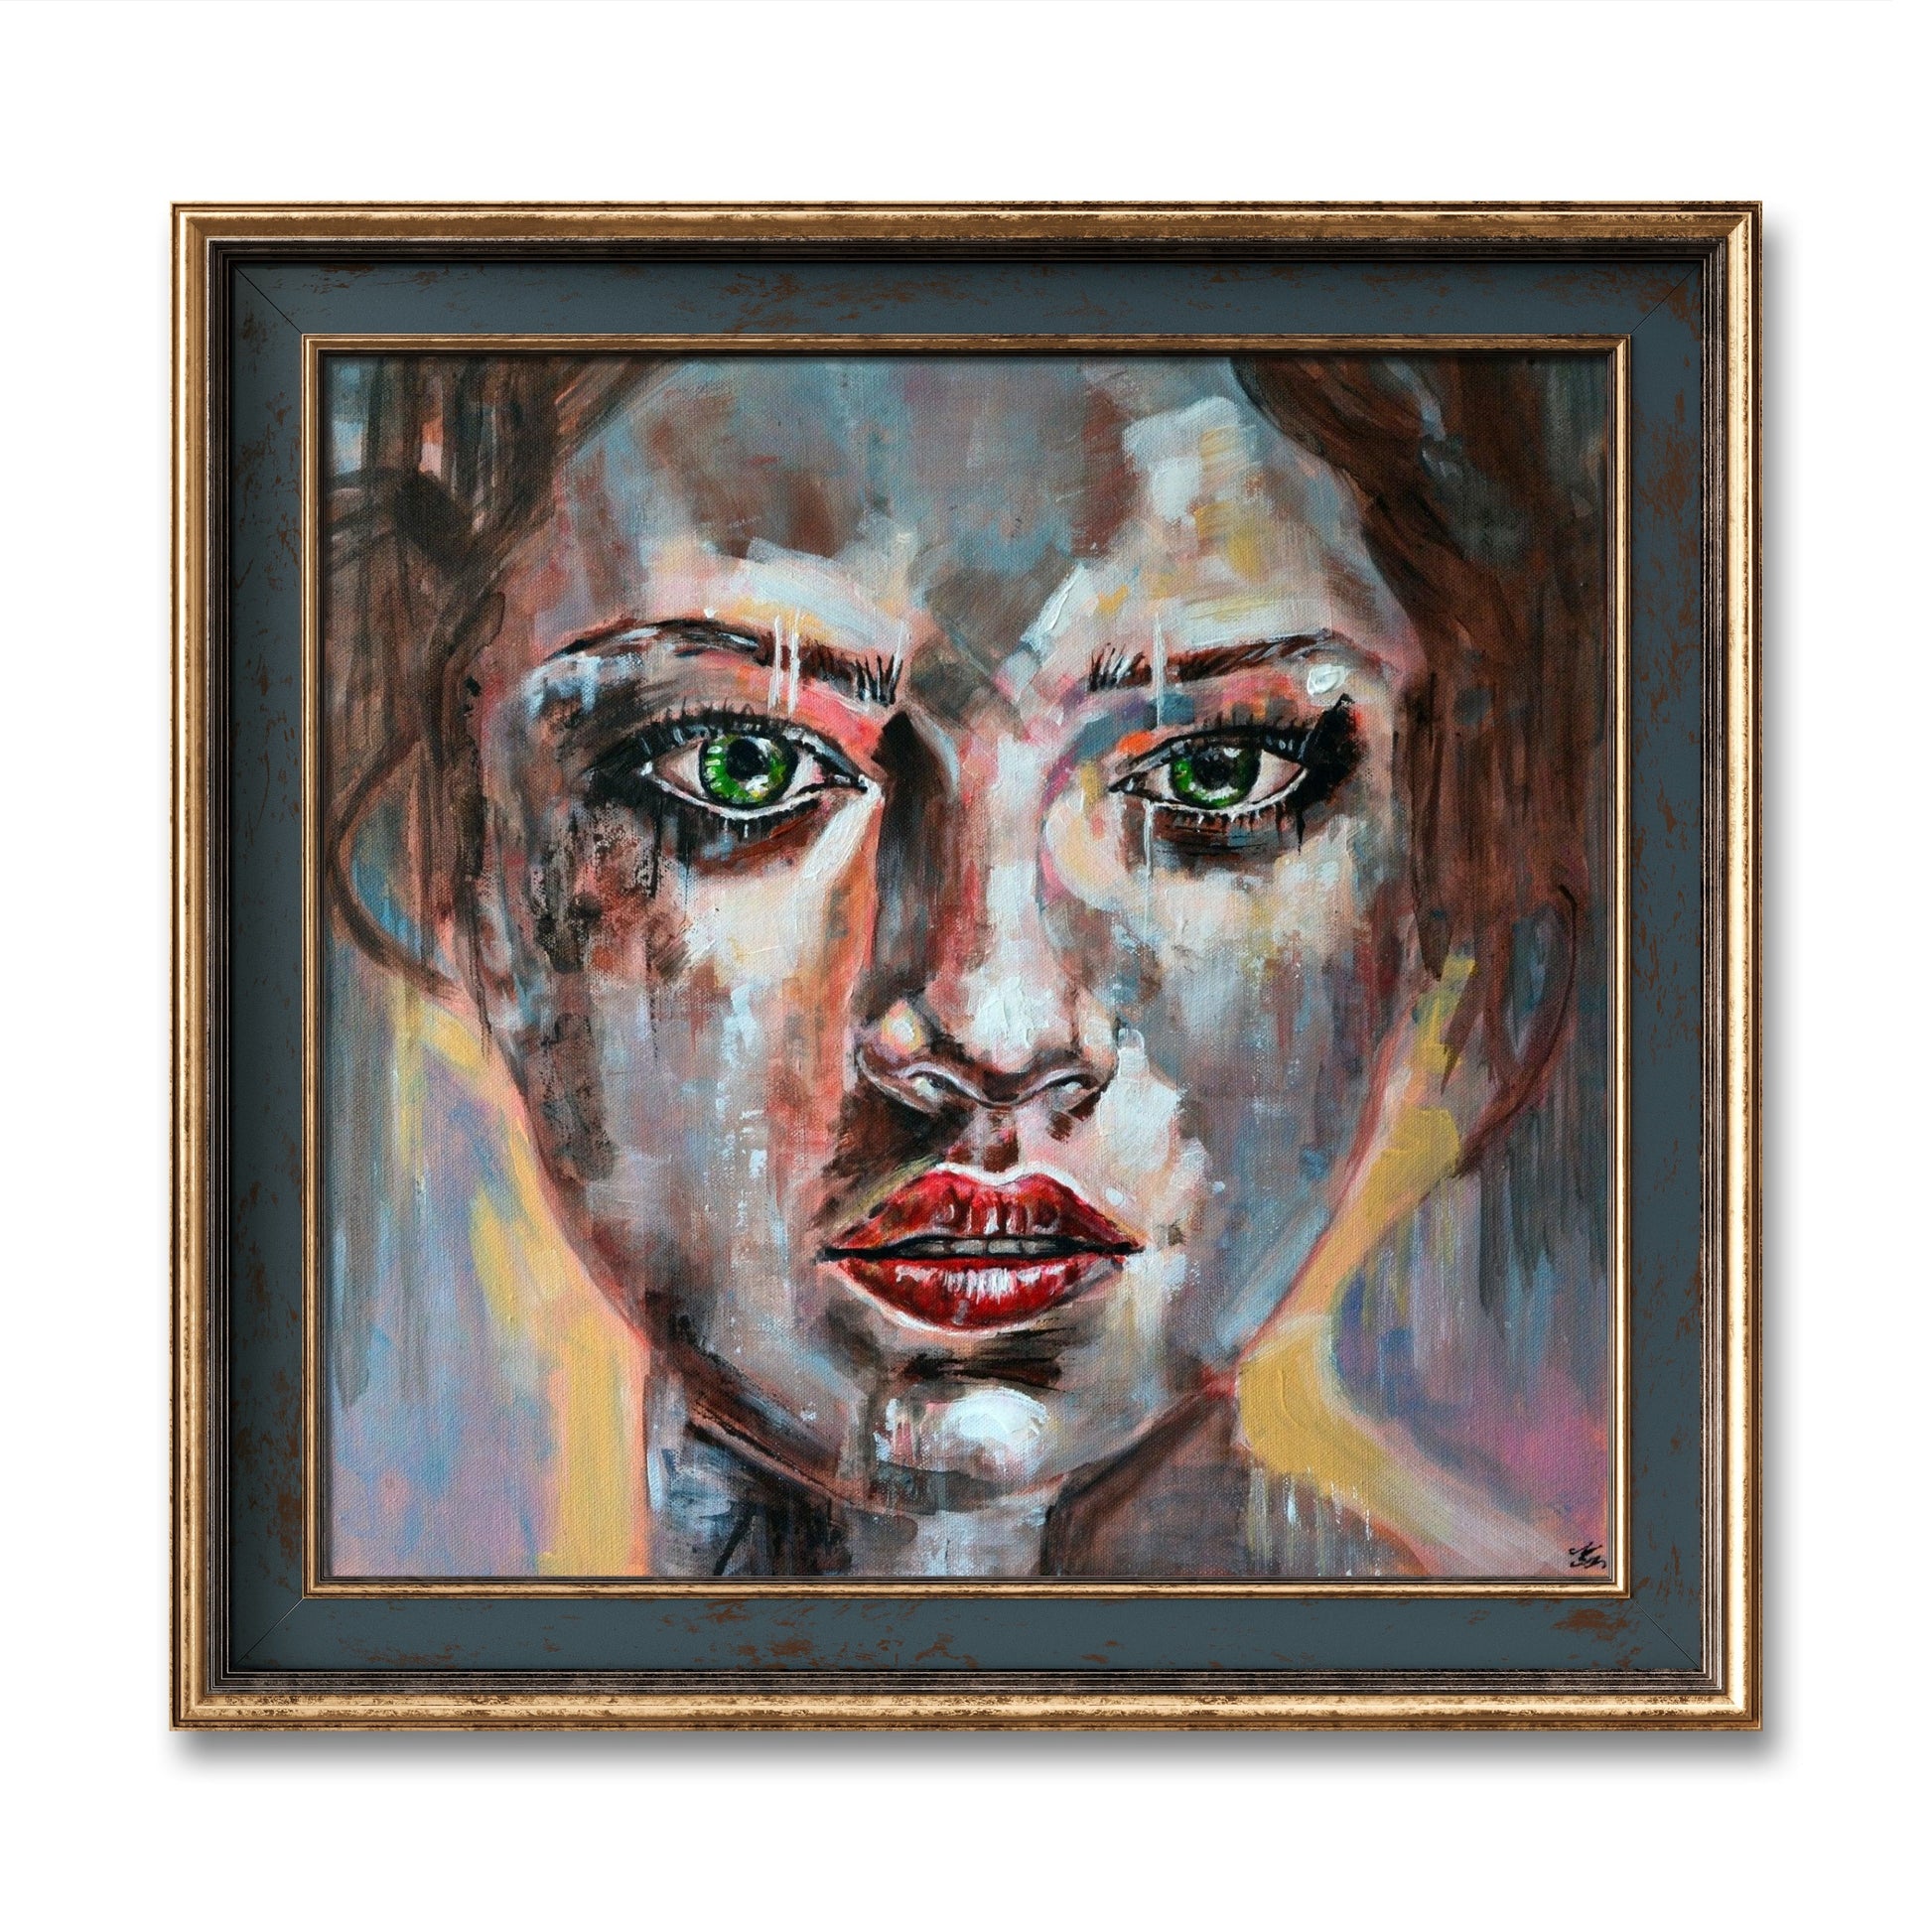 Vibrant abstract portrait of a woman on canvas, titled 'Shining,' by artist Misty Lady.